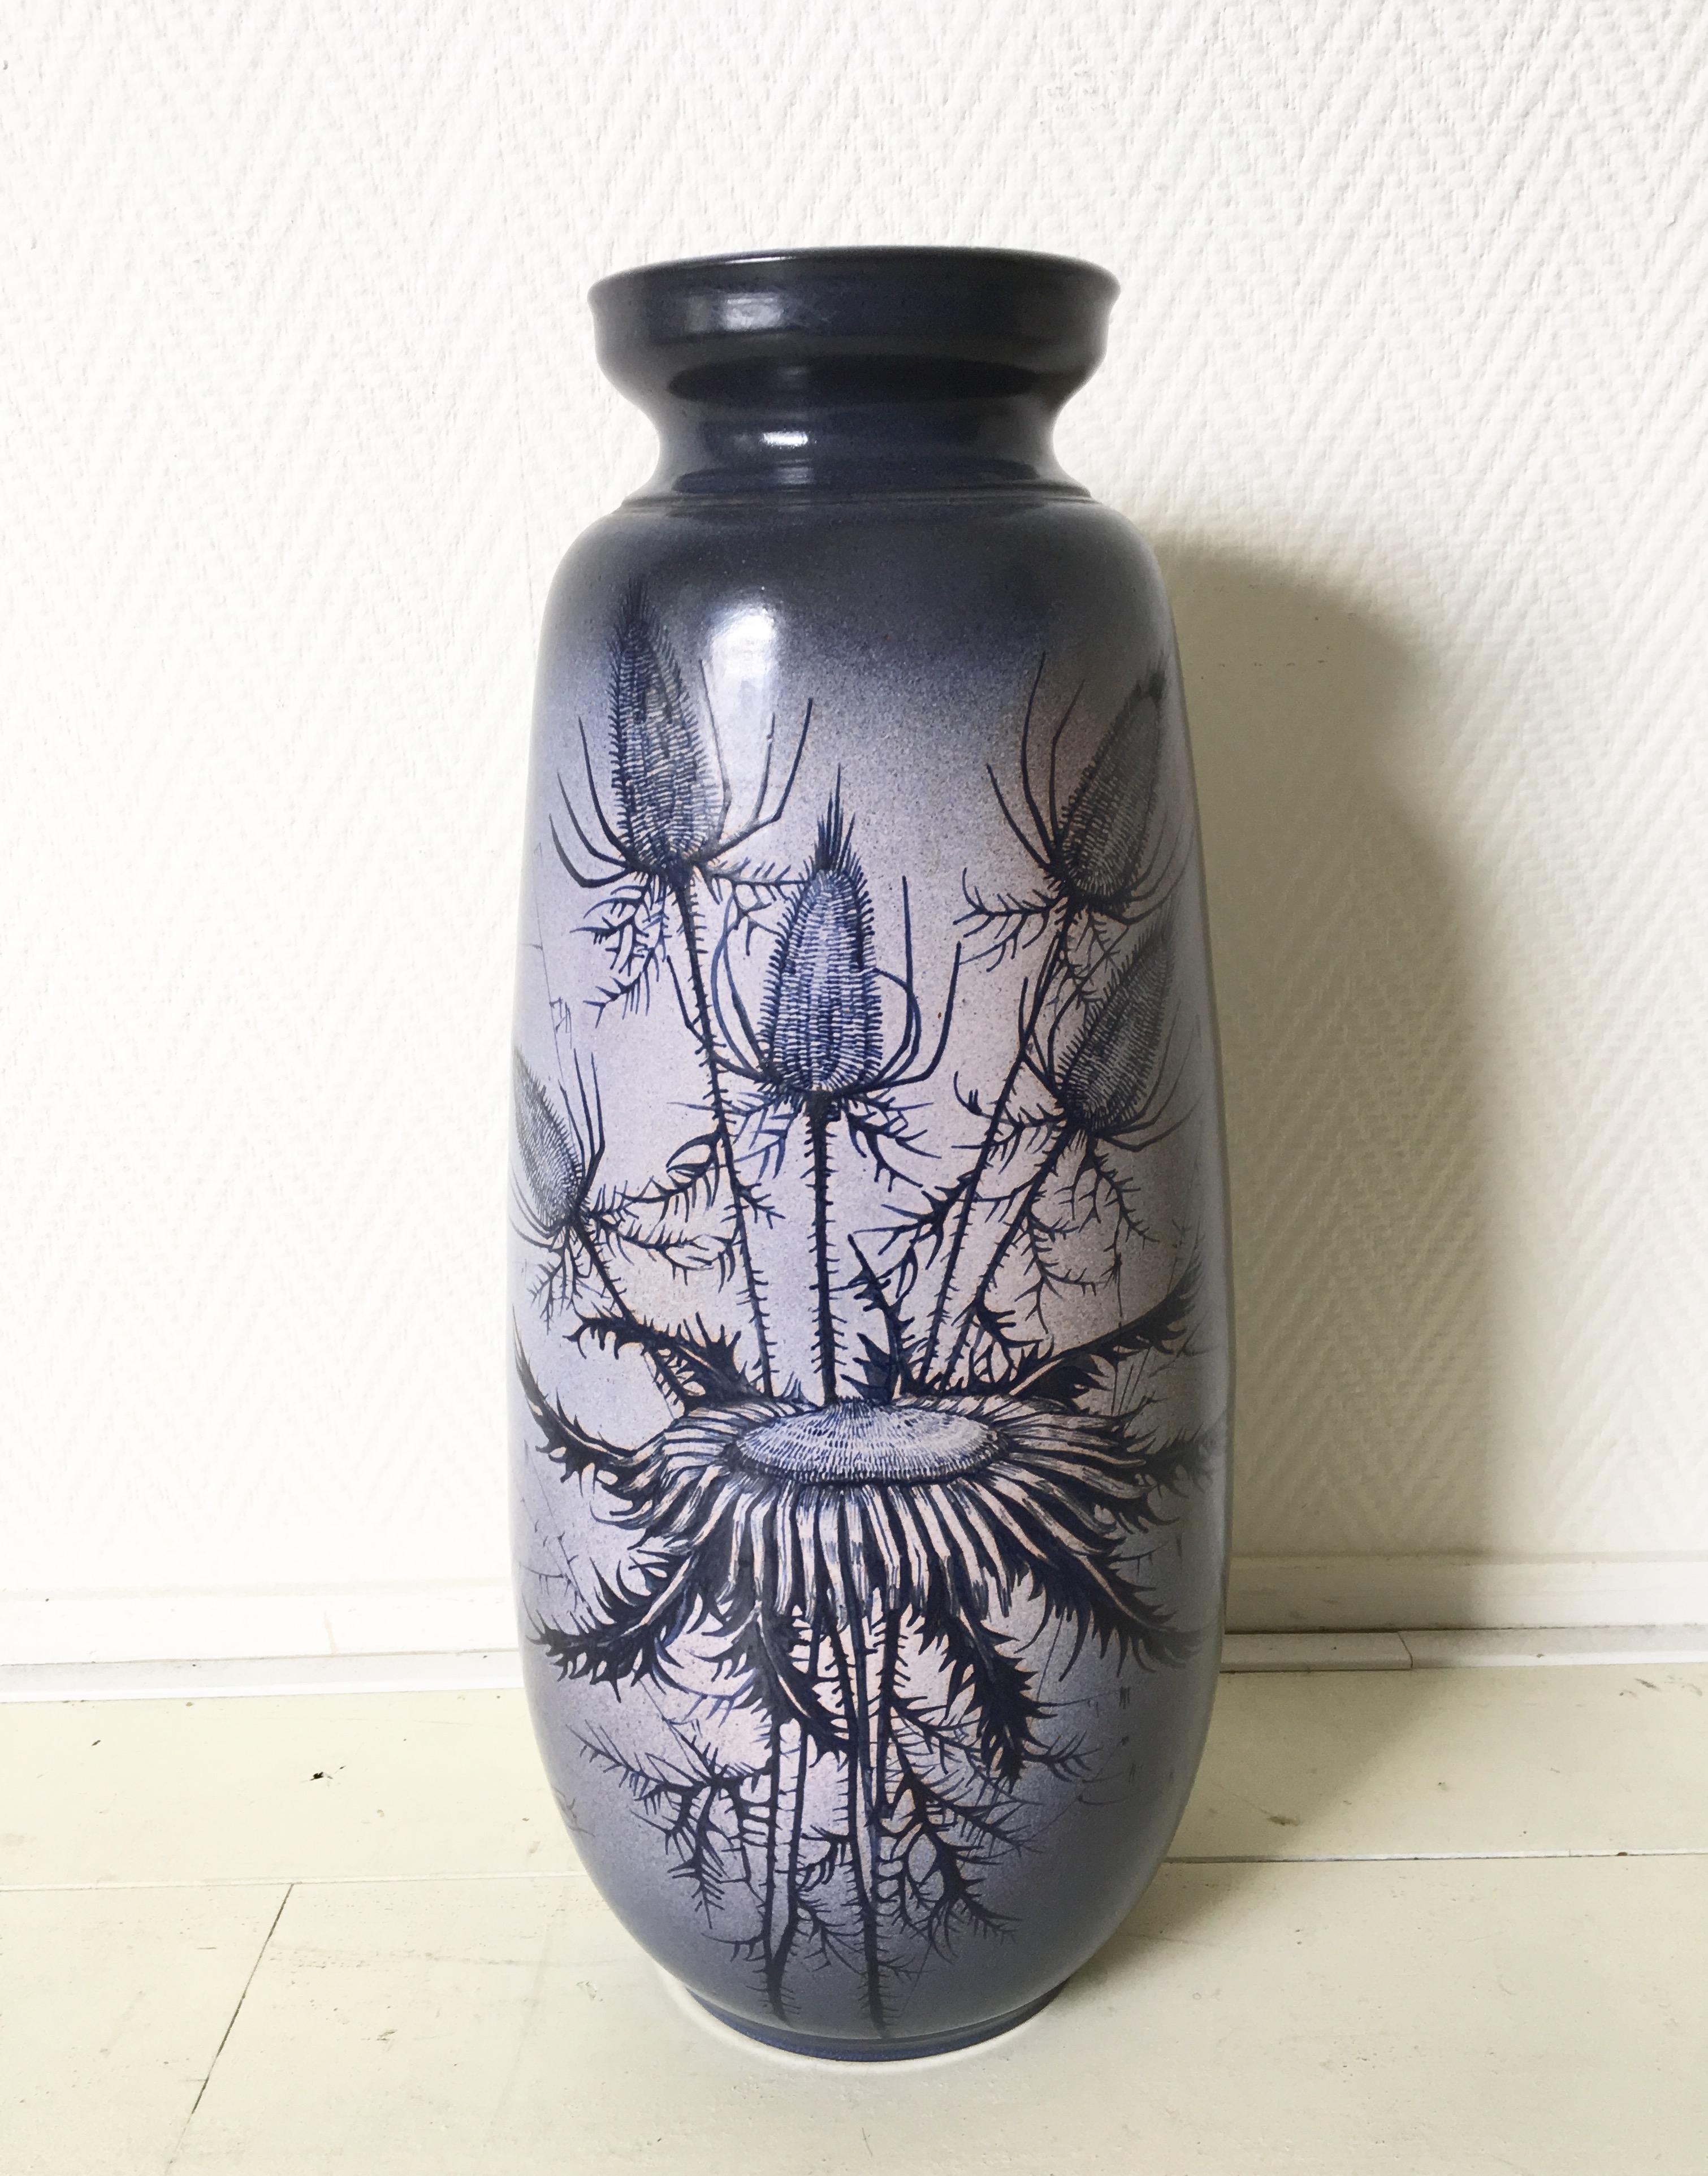 This unusual vase was designed by Jaques Fonck et Jean Mateo for Vallauris, circa 1960s. Floral decoration consisting of Thistle and Sunflowers. This large piece remains in excellent condition. Signed. 